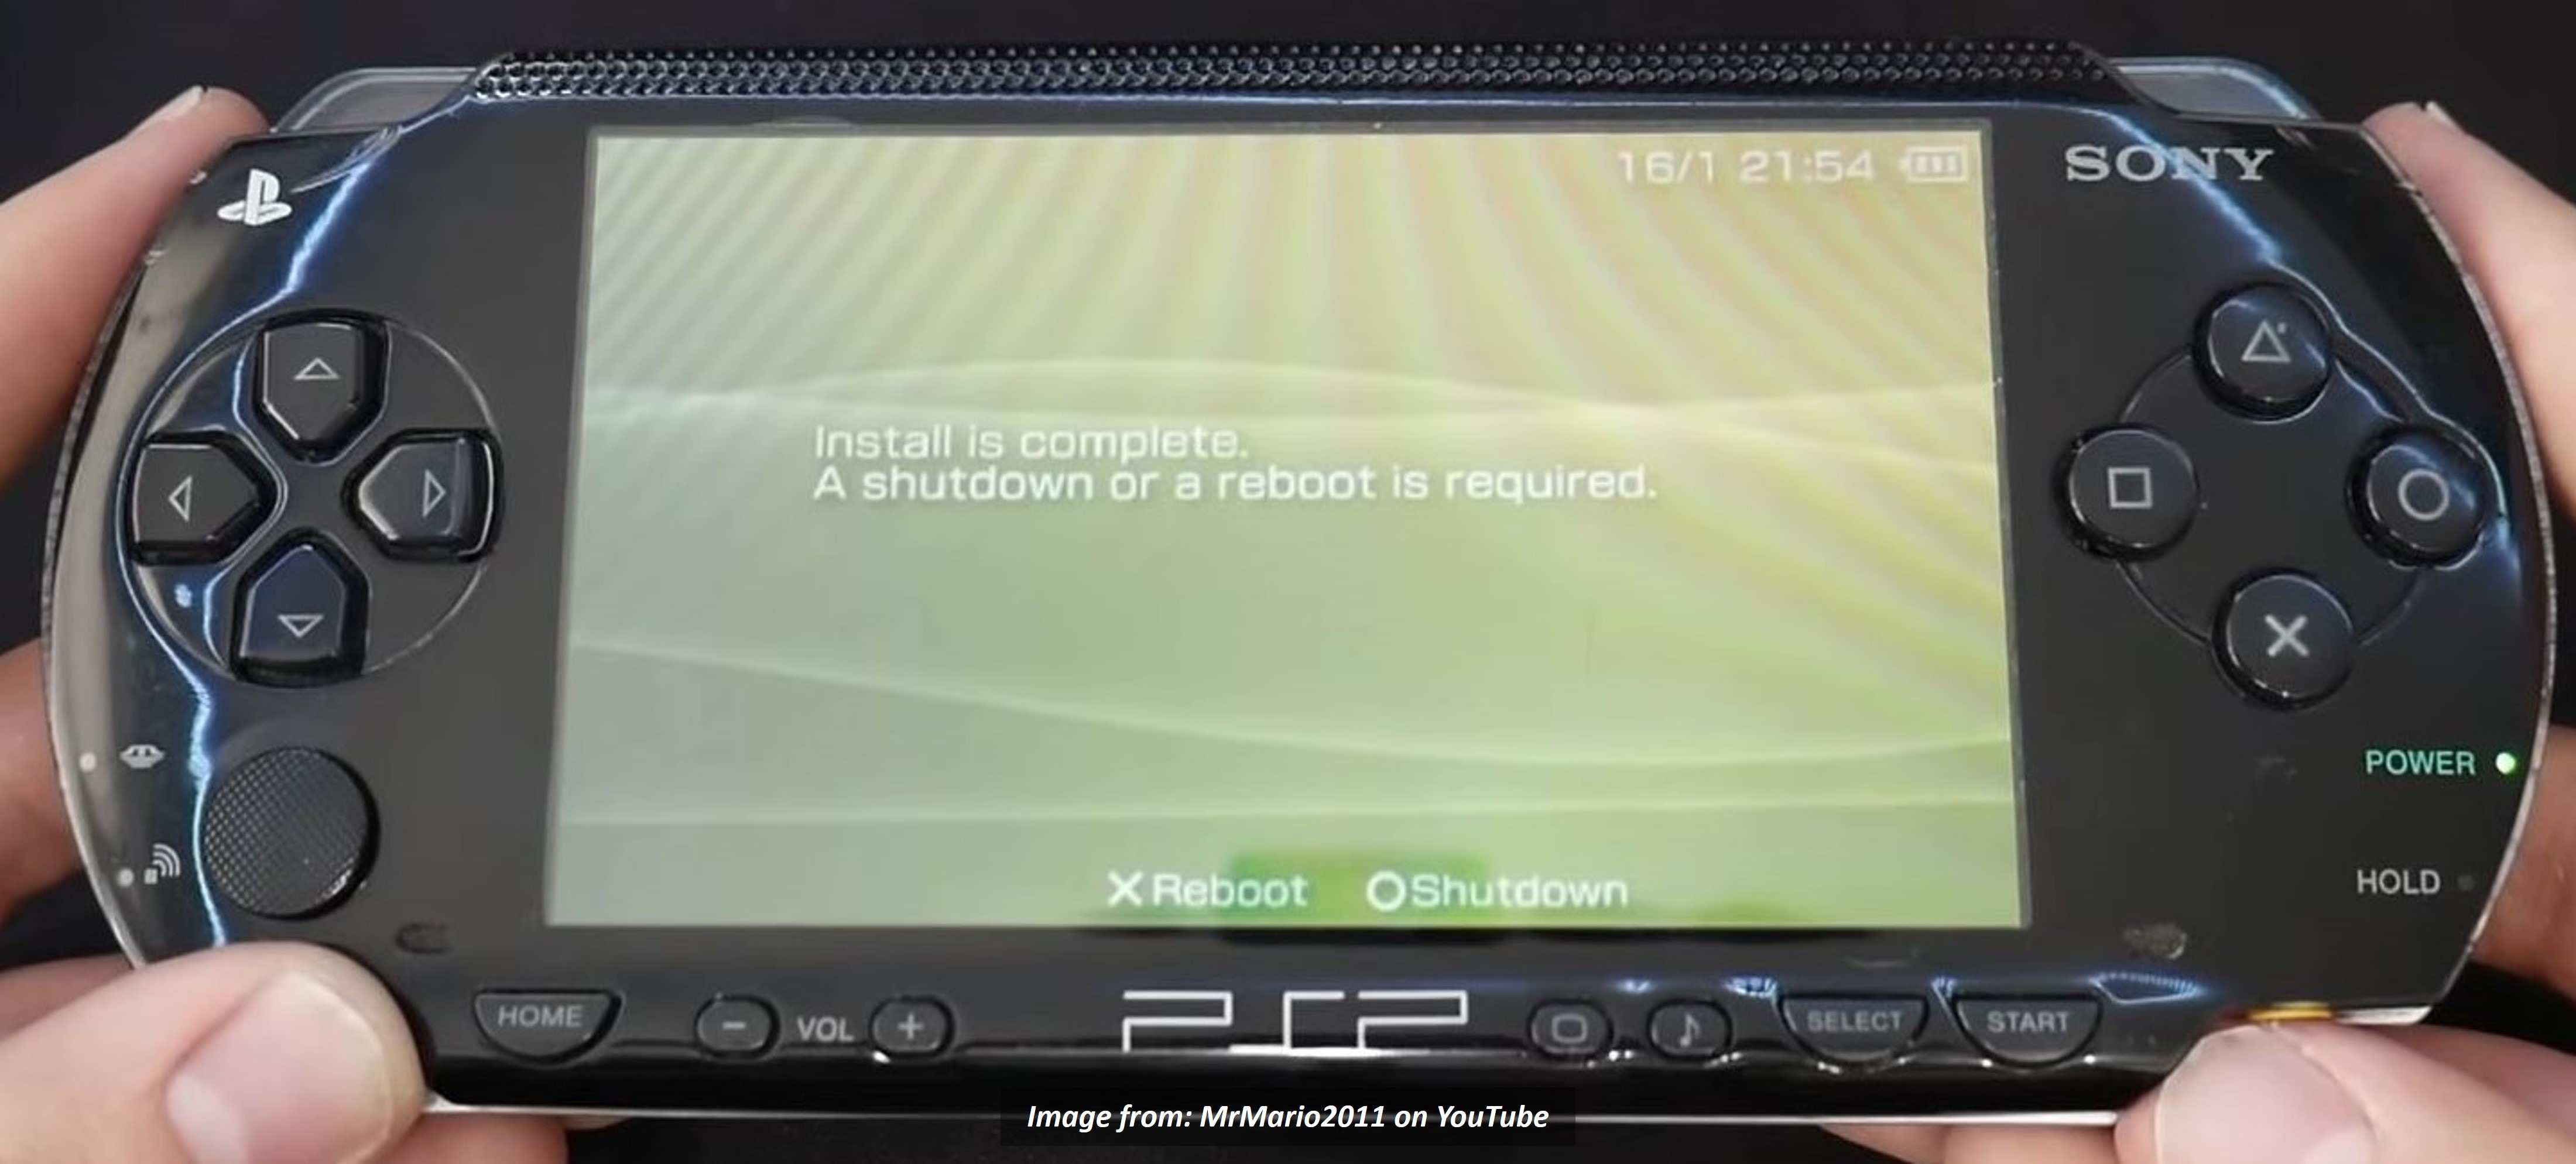 psp install complete message